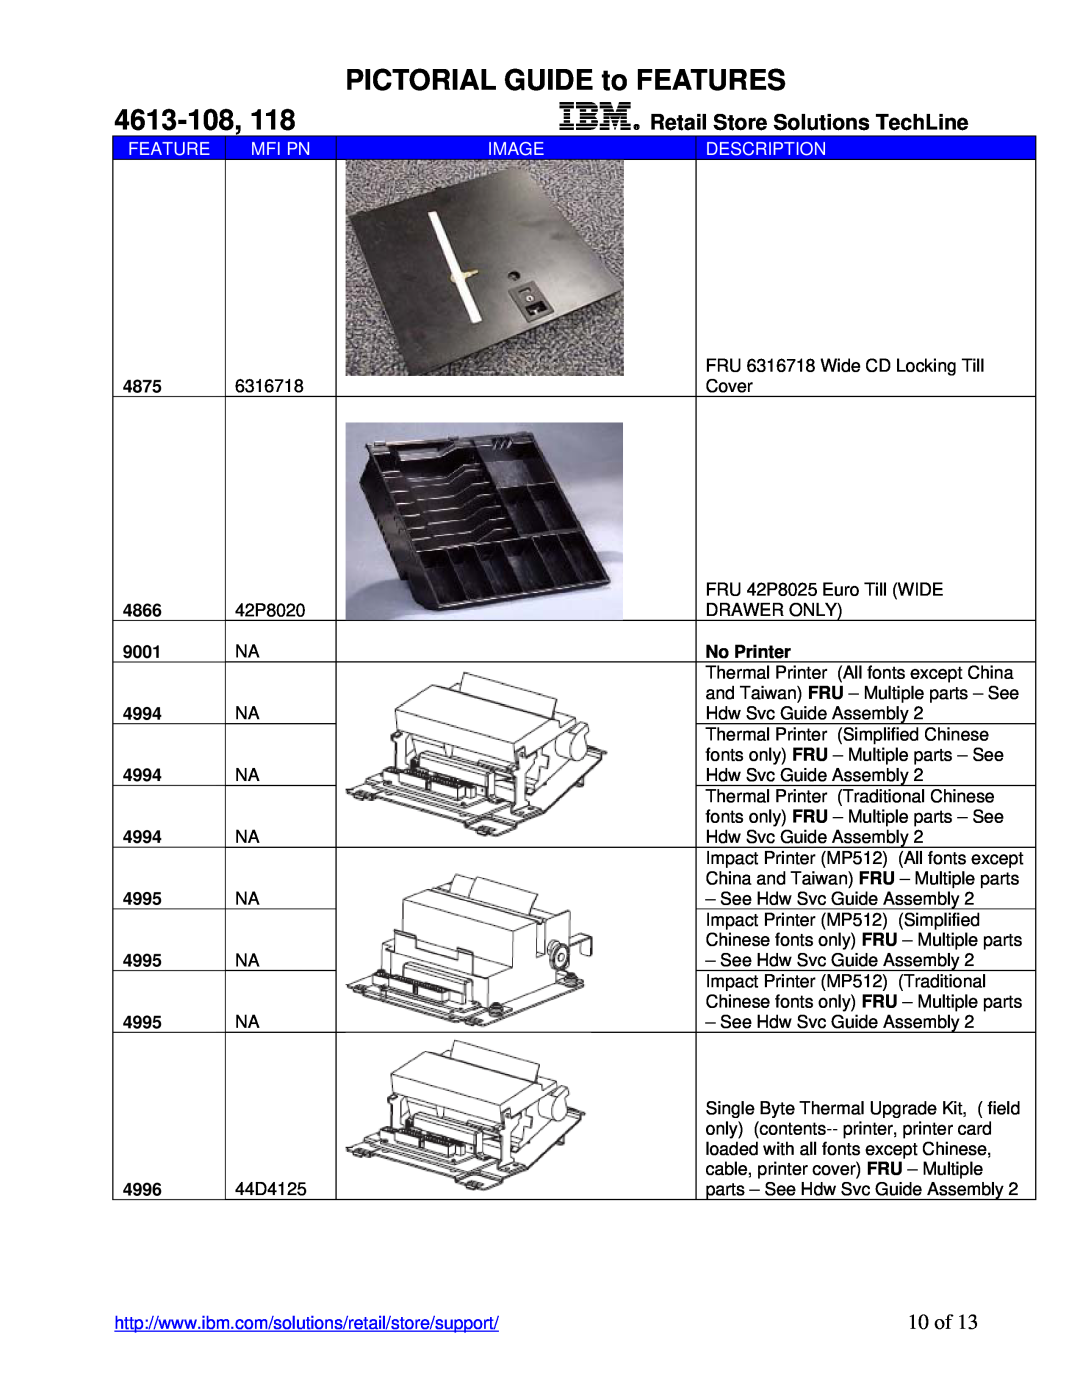 IBM 4613-108, E08 10 of, PICTORIAL GUIDE to FEATURES, Retail Store Solutions TechLine, Feature, Mfi Pn, Image, Description 